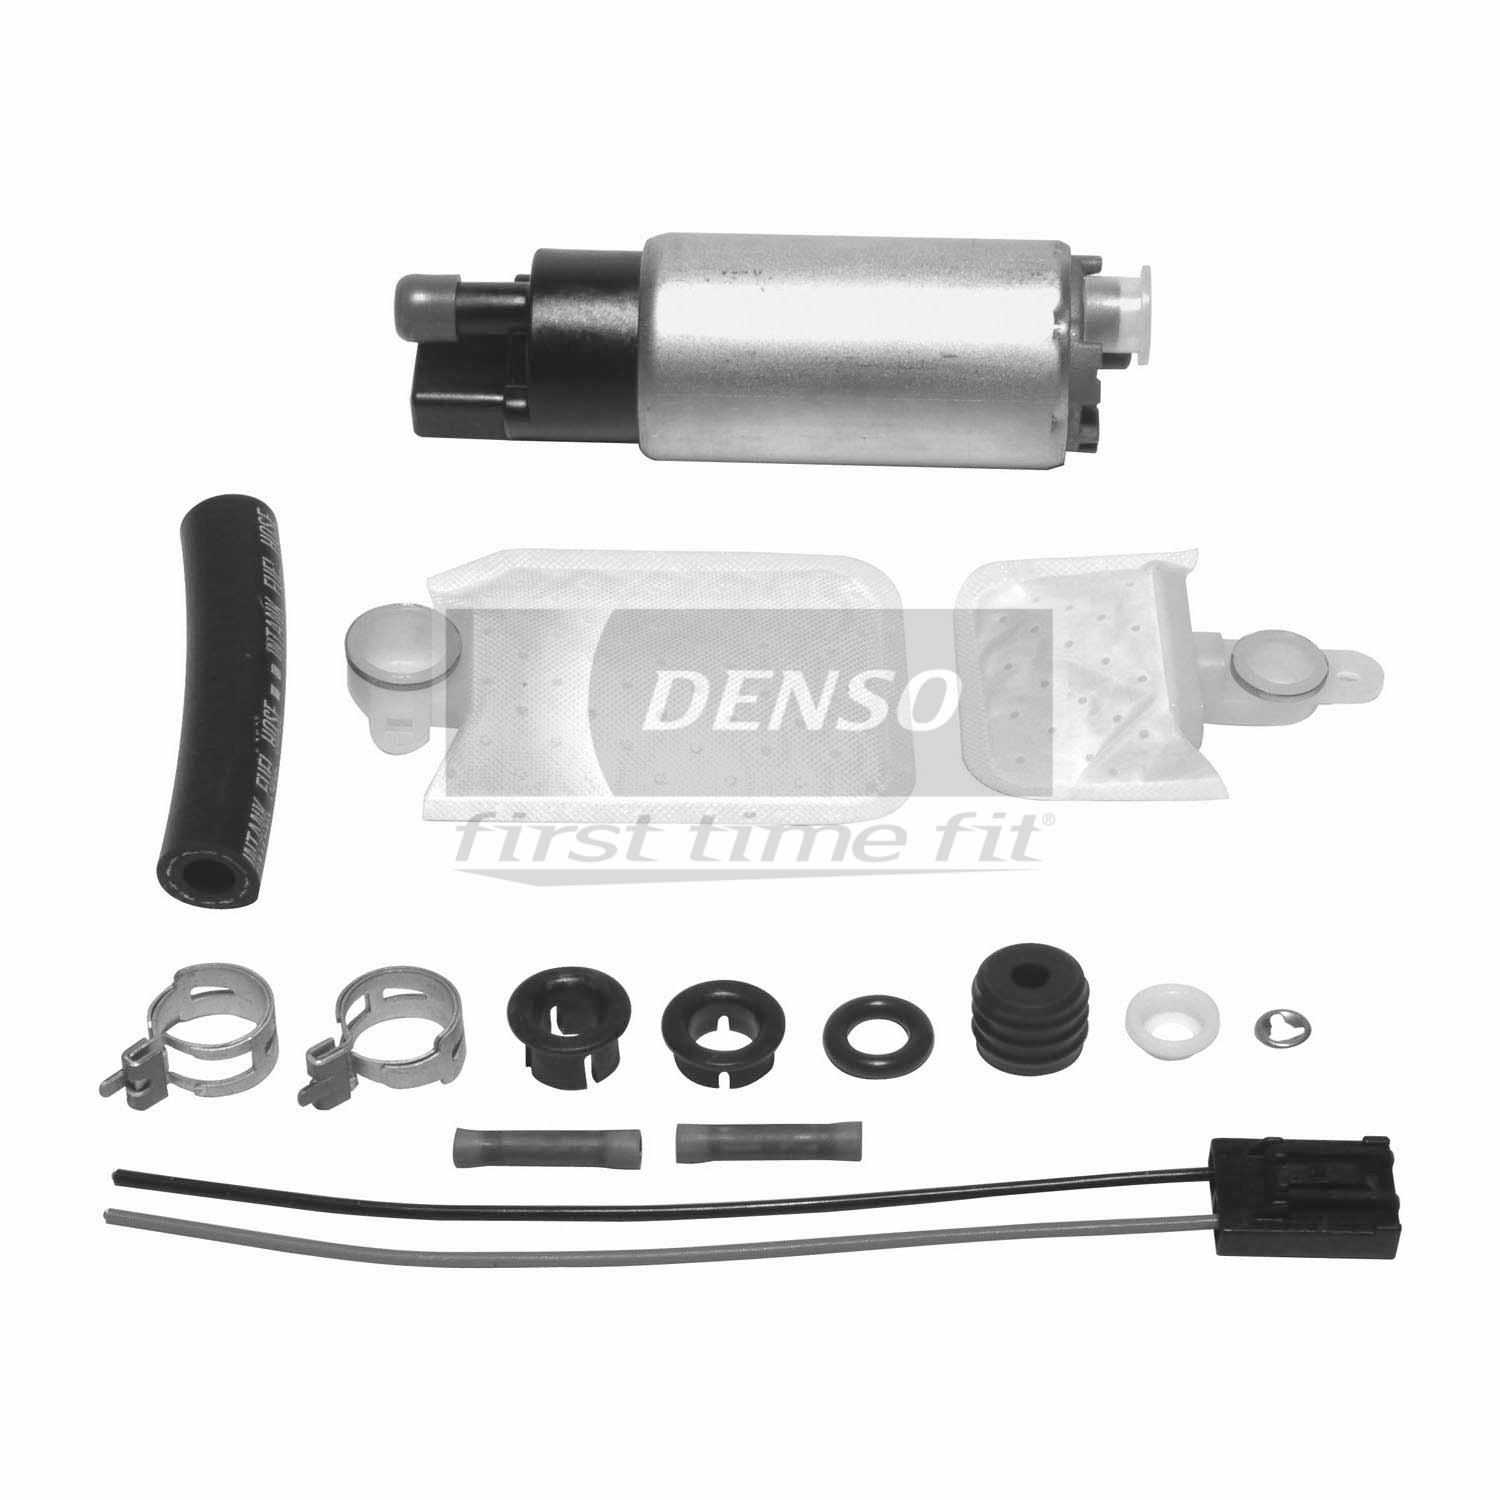 Image of ID 9500181 Denso 9500181 Fuel Pump and Strainer Set Fits 1992-1996 Ford E-150 Econoline